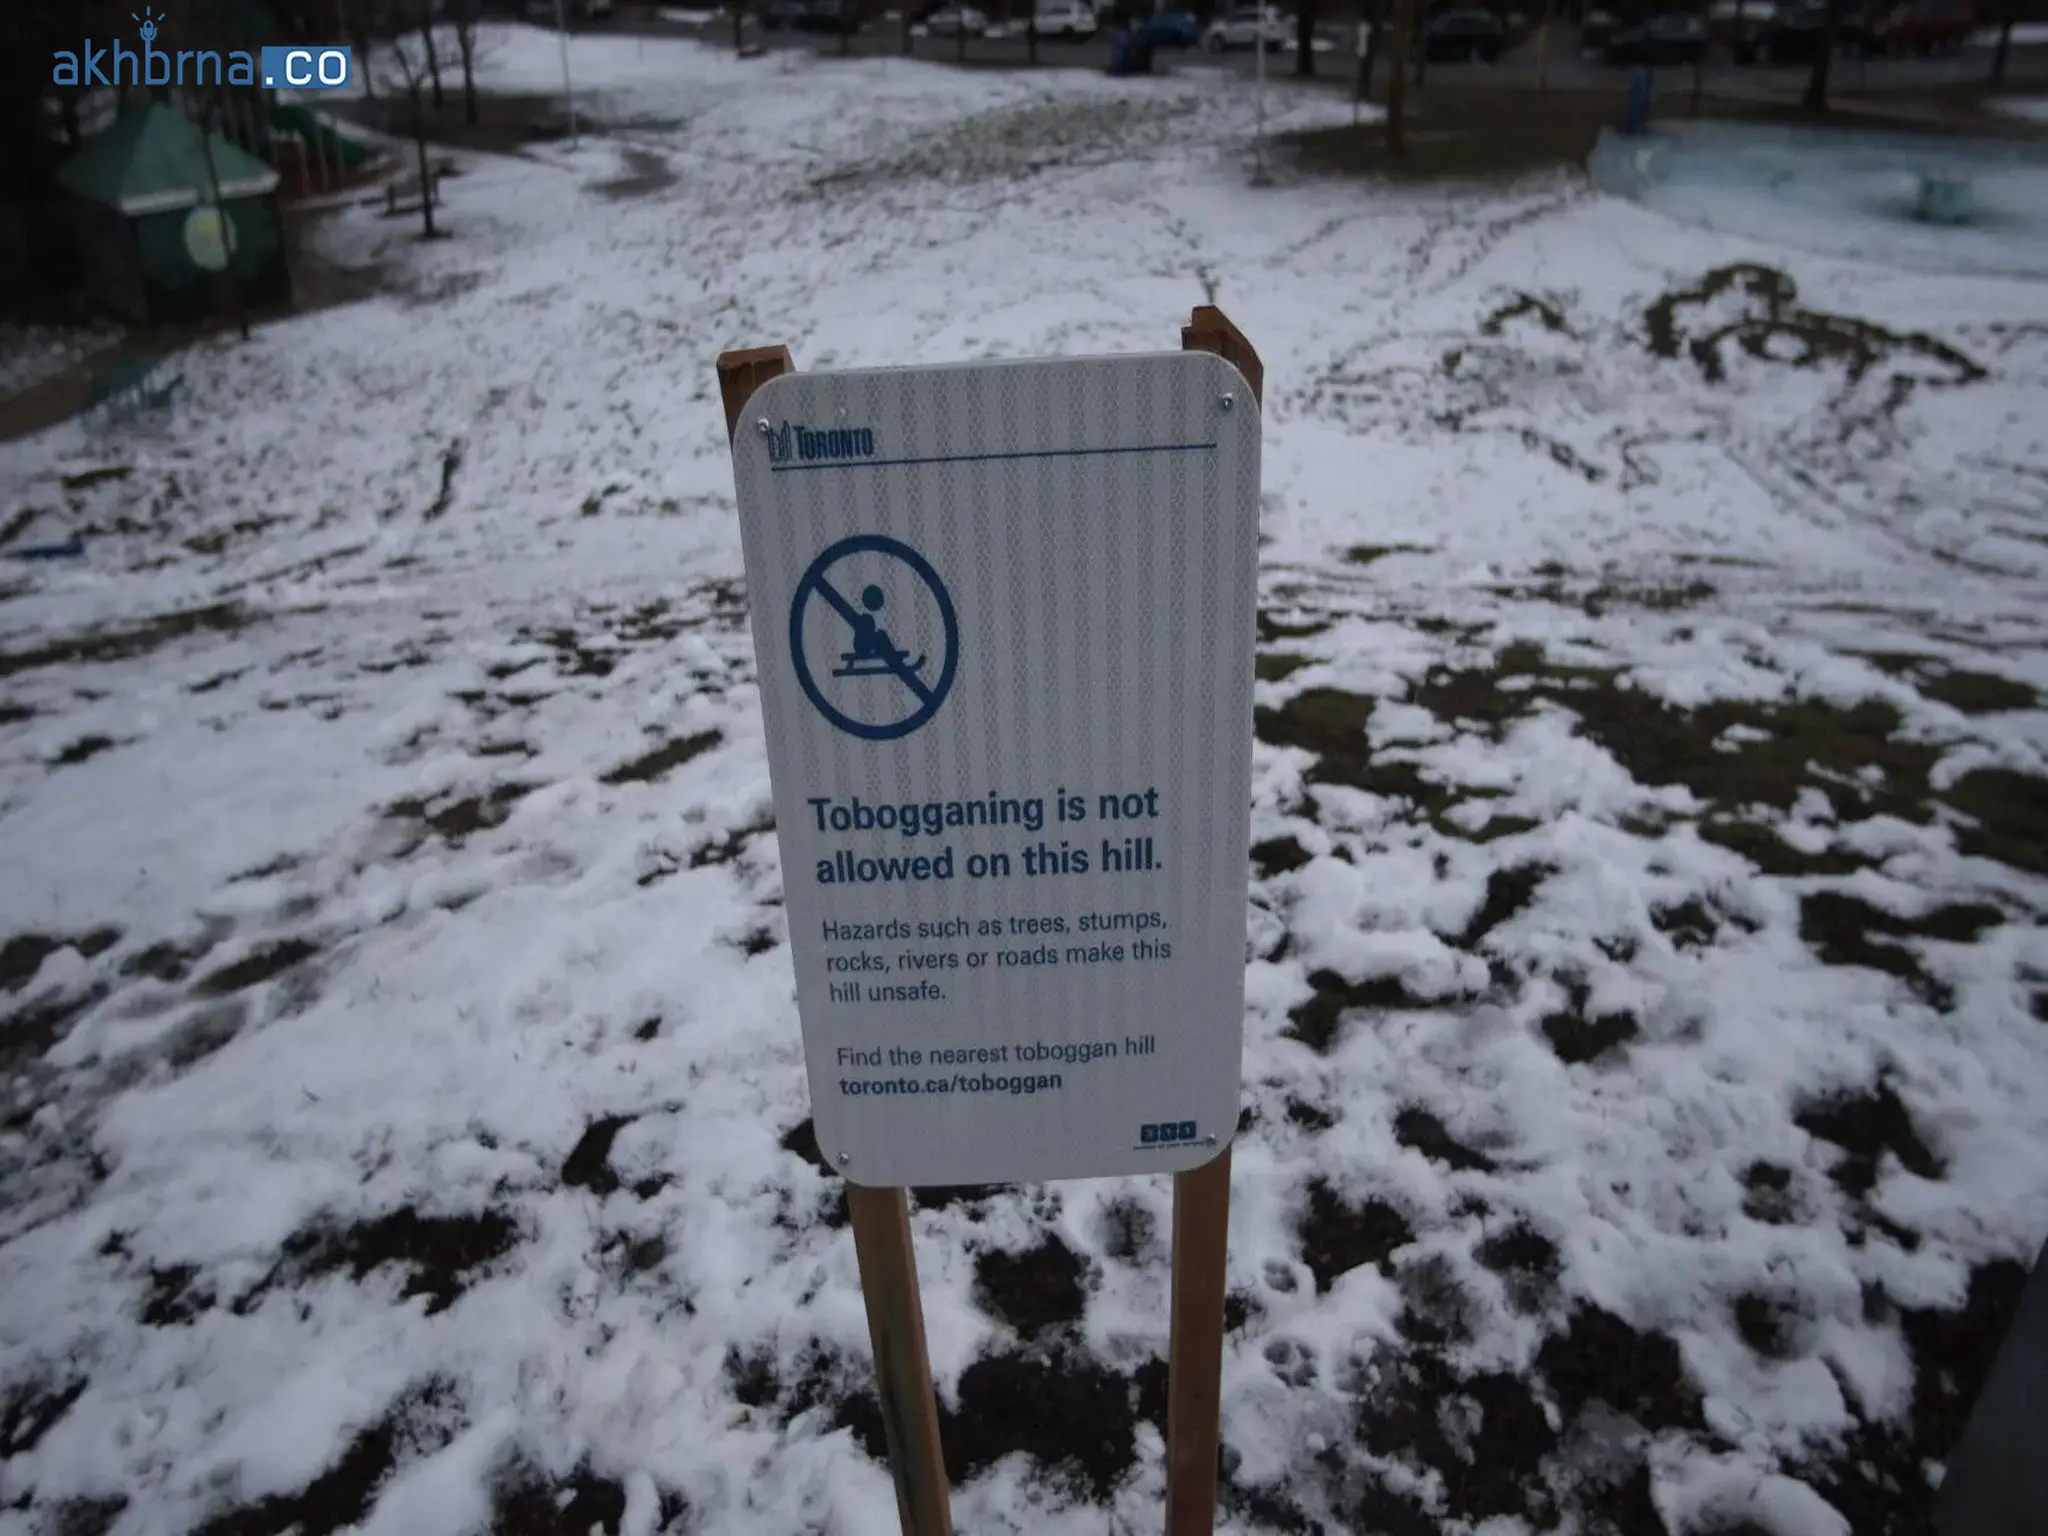 Canada announces a tobogganing ban on 45 hills in Toronto